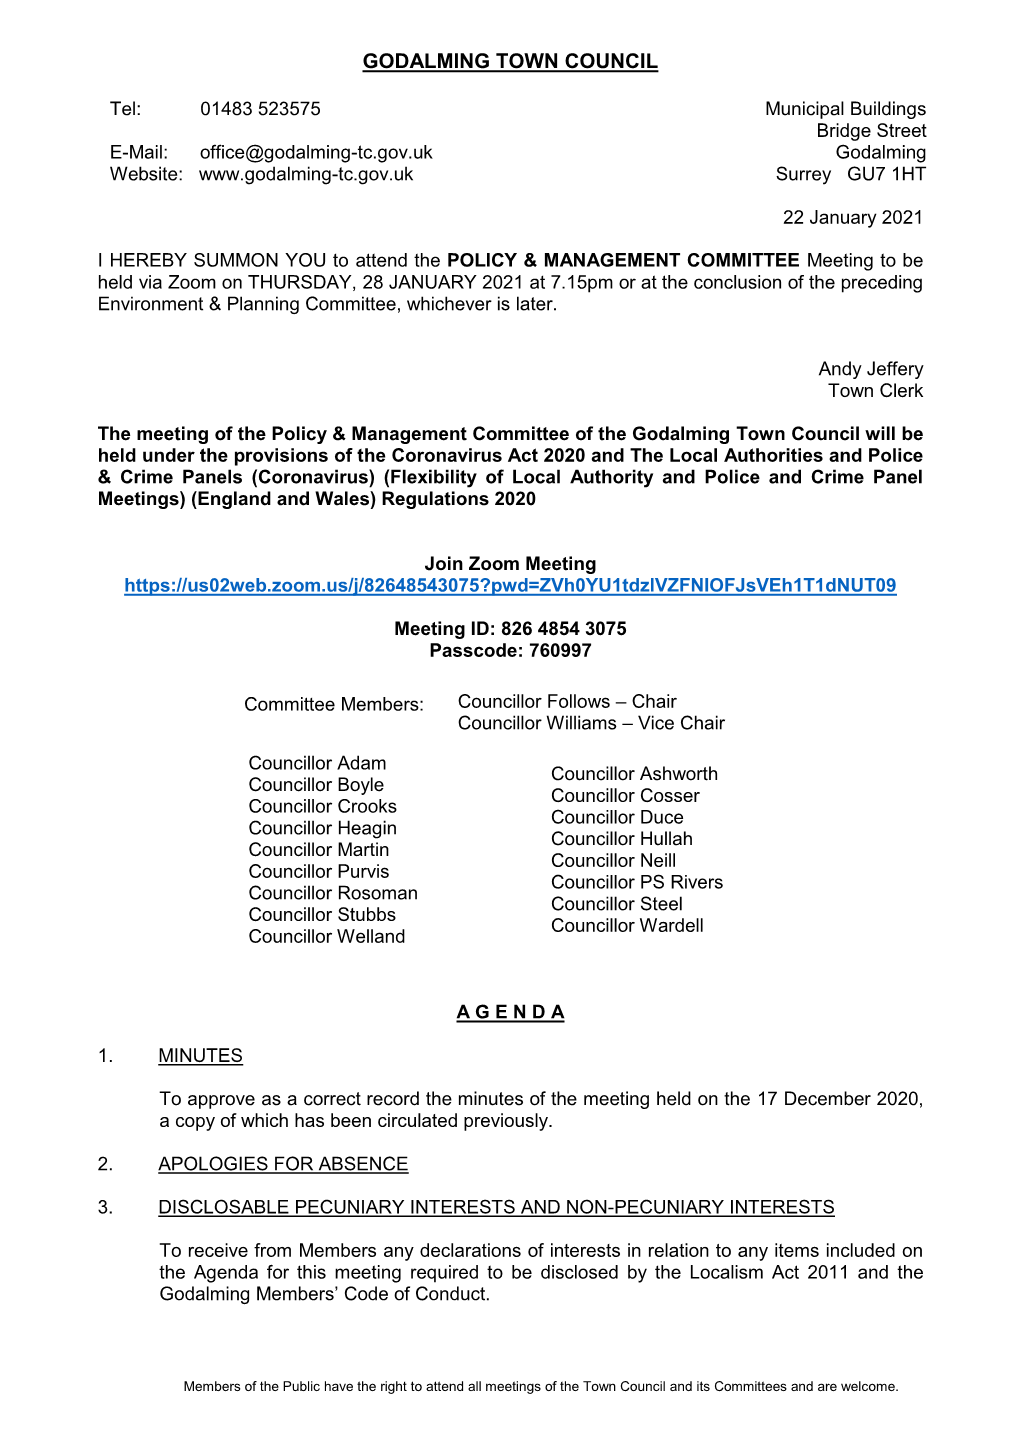 Agenda for This Meeting Required to Be Disclosed by the Localism Act 2011 and the Godalming Members’ Code of Conduct